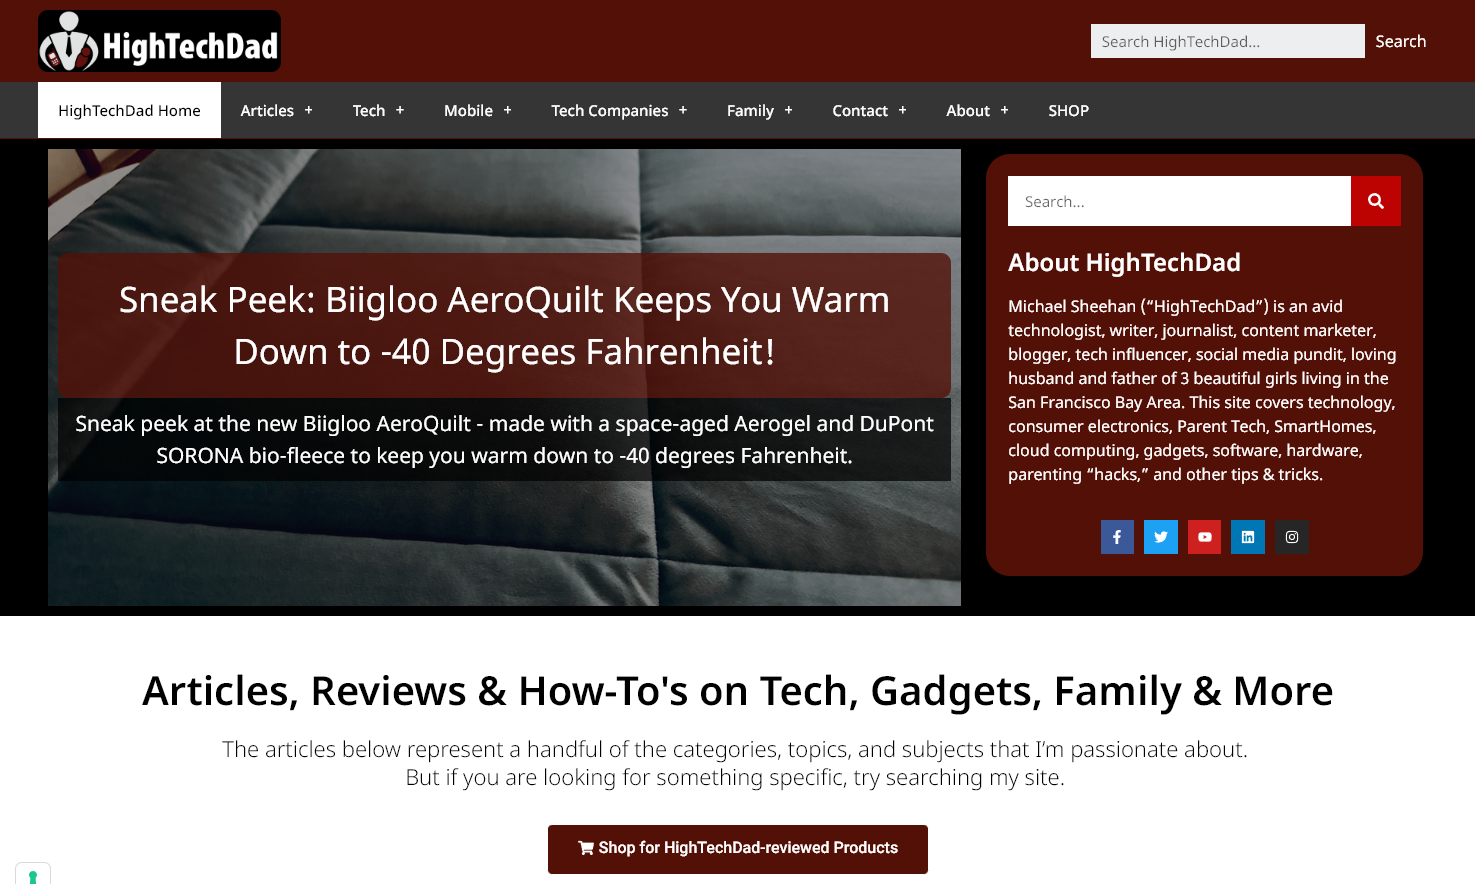 HighTechDad Blog Example (Homepage) and Influencer to Learn From